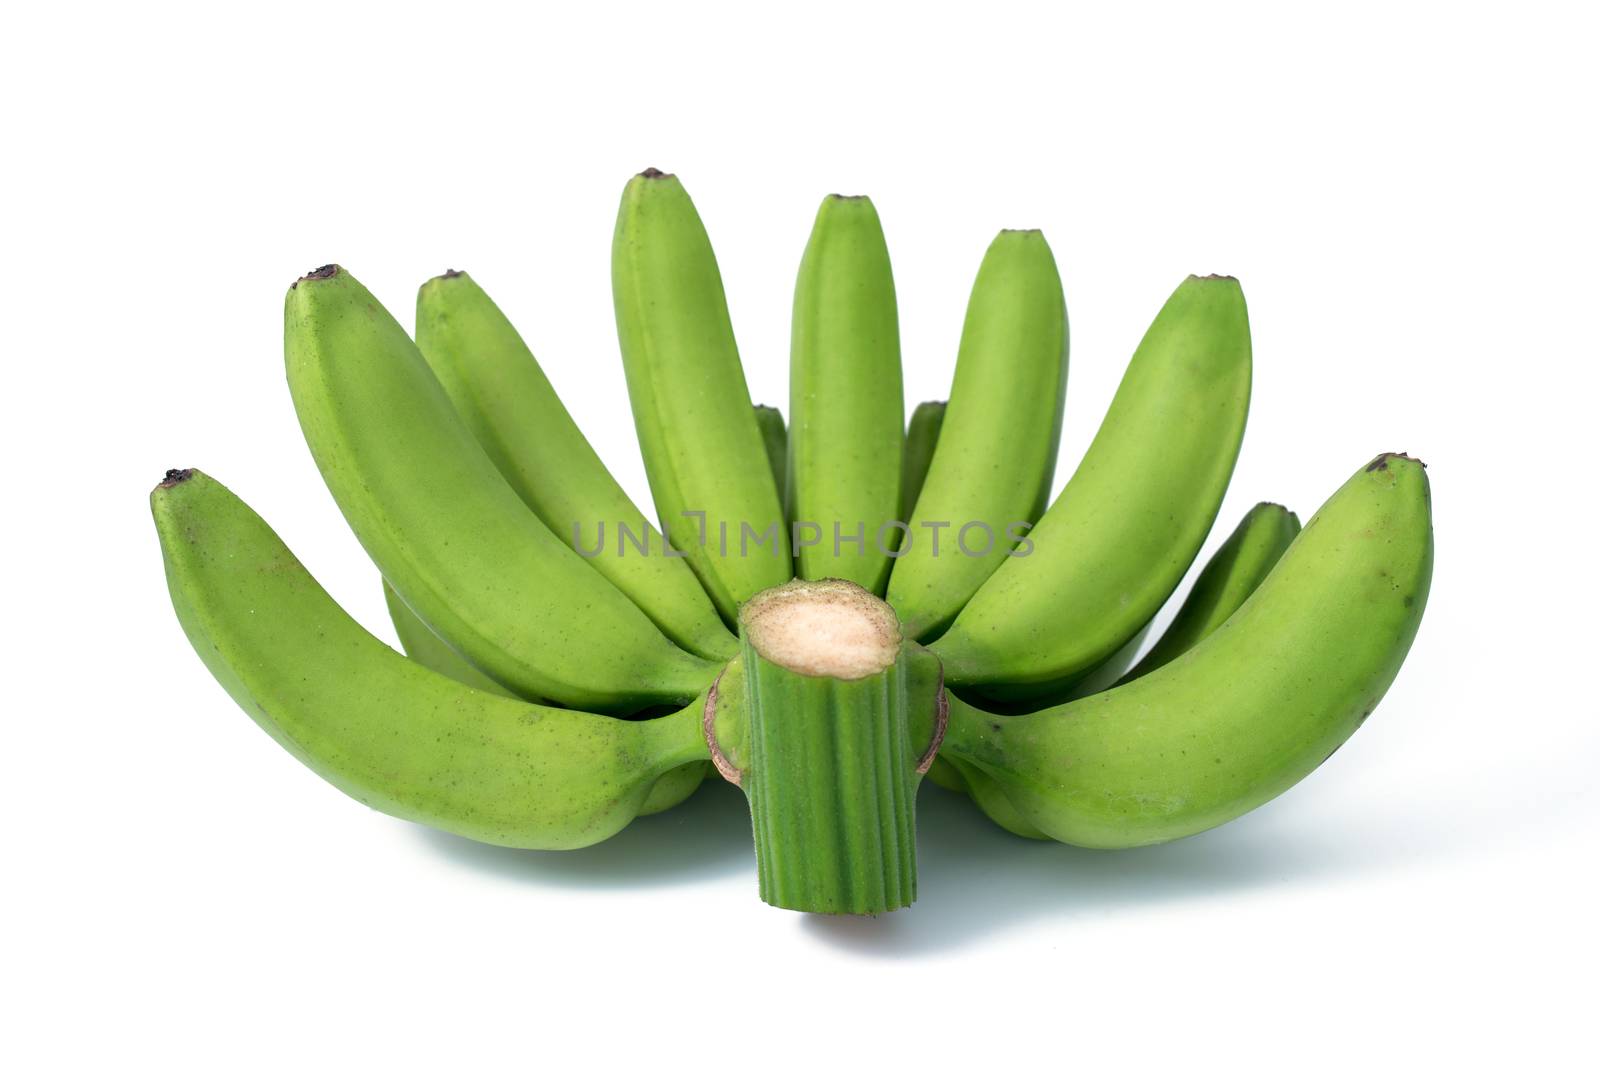 bunch of green bananas isolated on white background